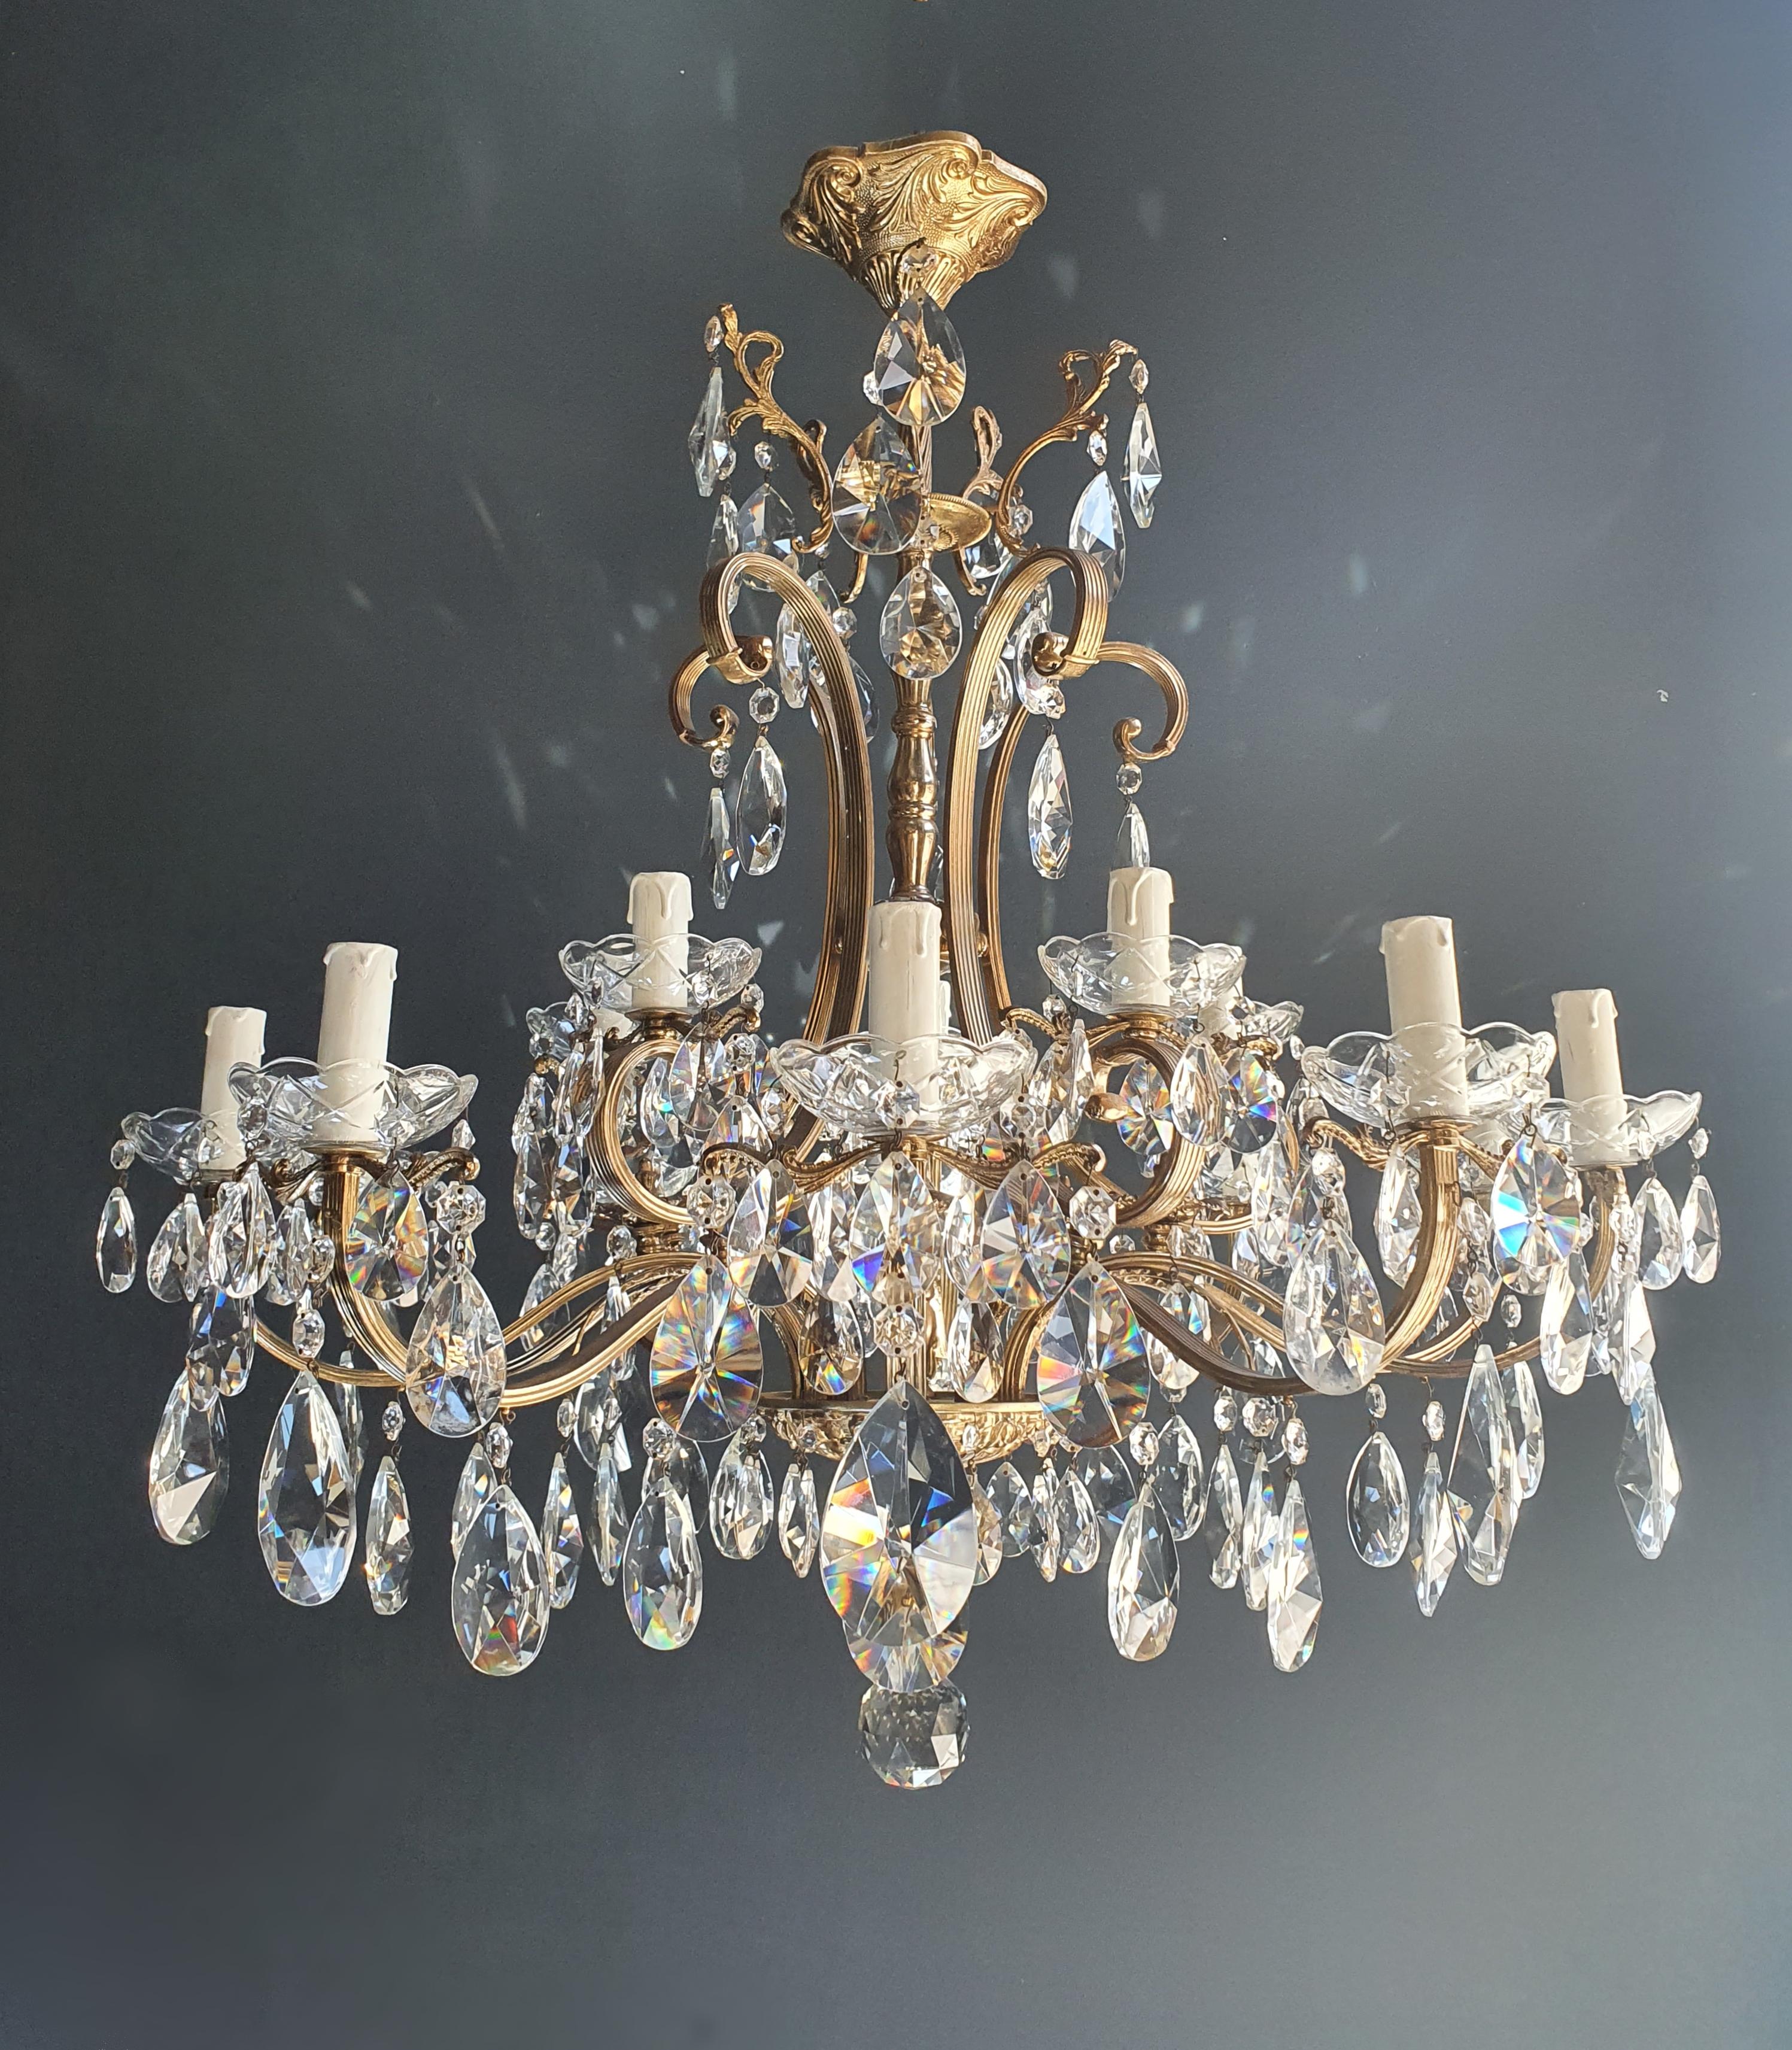 Sparkle crystal brass candelabrum antique chandelier ceiling lustre Art Nouveau

Measures: Total height 88 cm, height without chain 88 cm, diameter 80 cm. Weight (approximately): 15 kg.

Number of lights: 15-light bulb sockets: E14 material: Cut